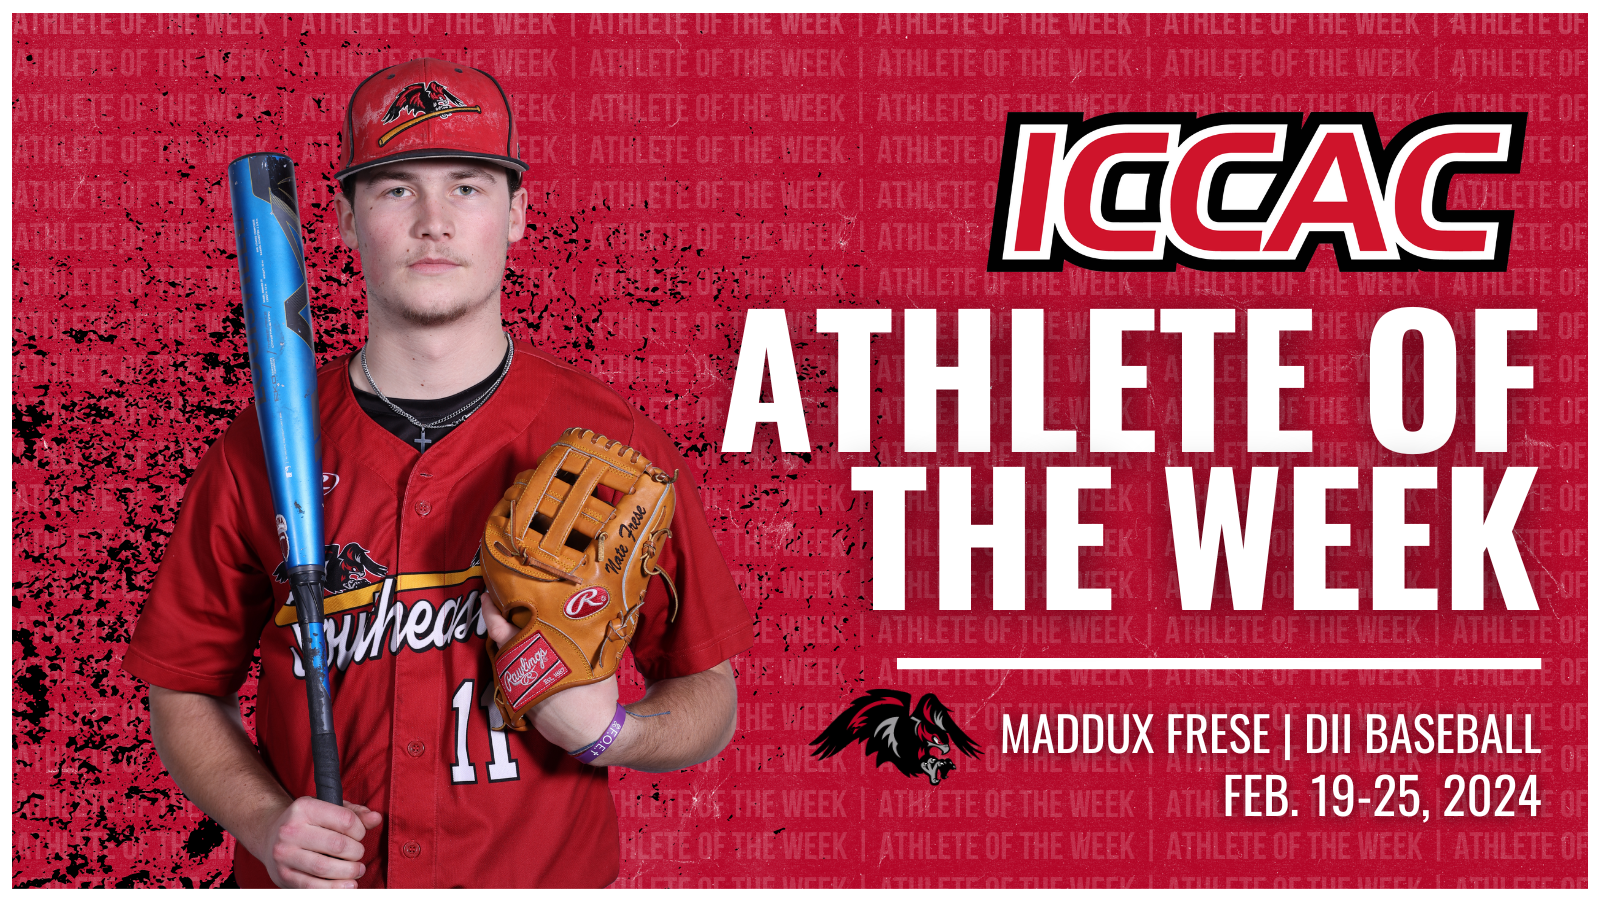 FRESE EARNS ICCAC ATHLETE OF THE WEEK HONORS